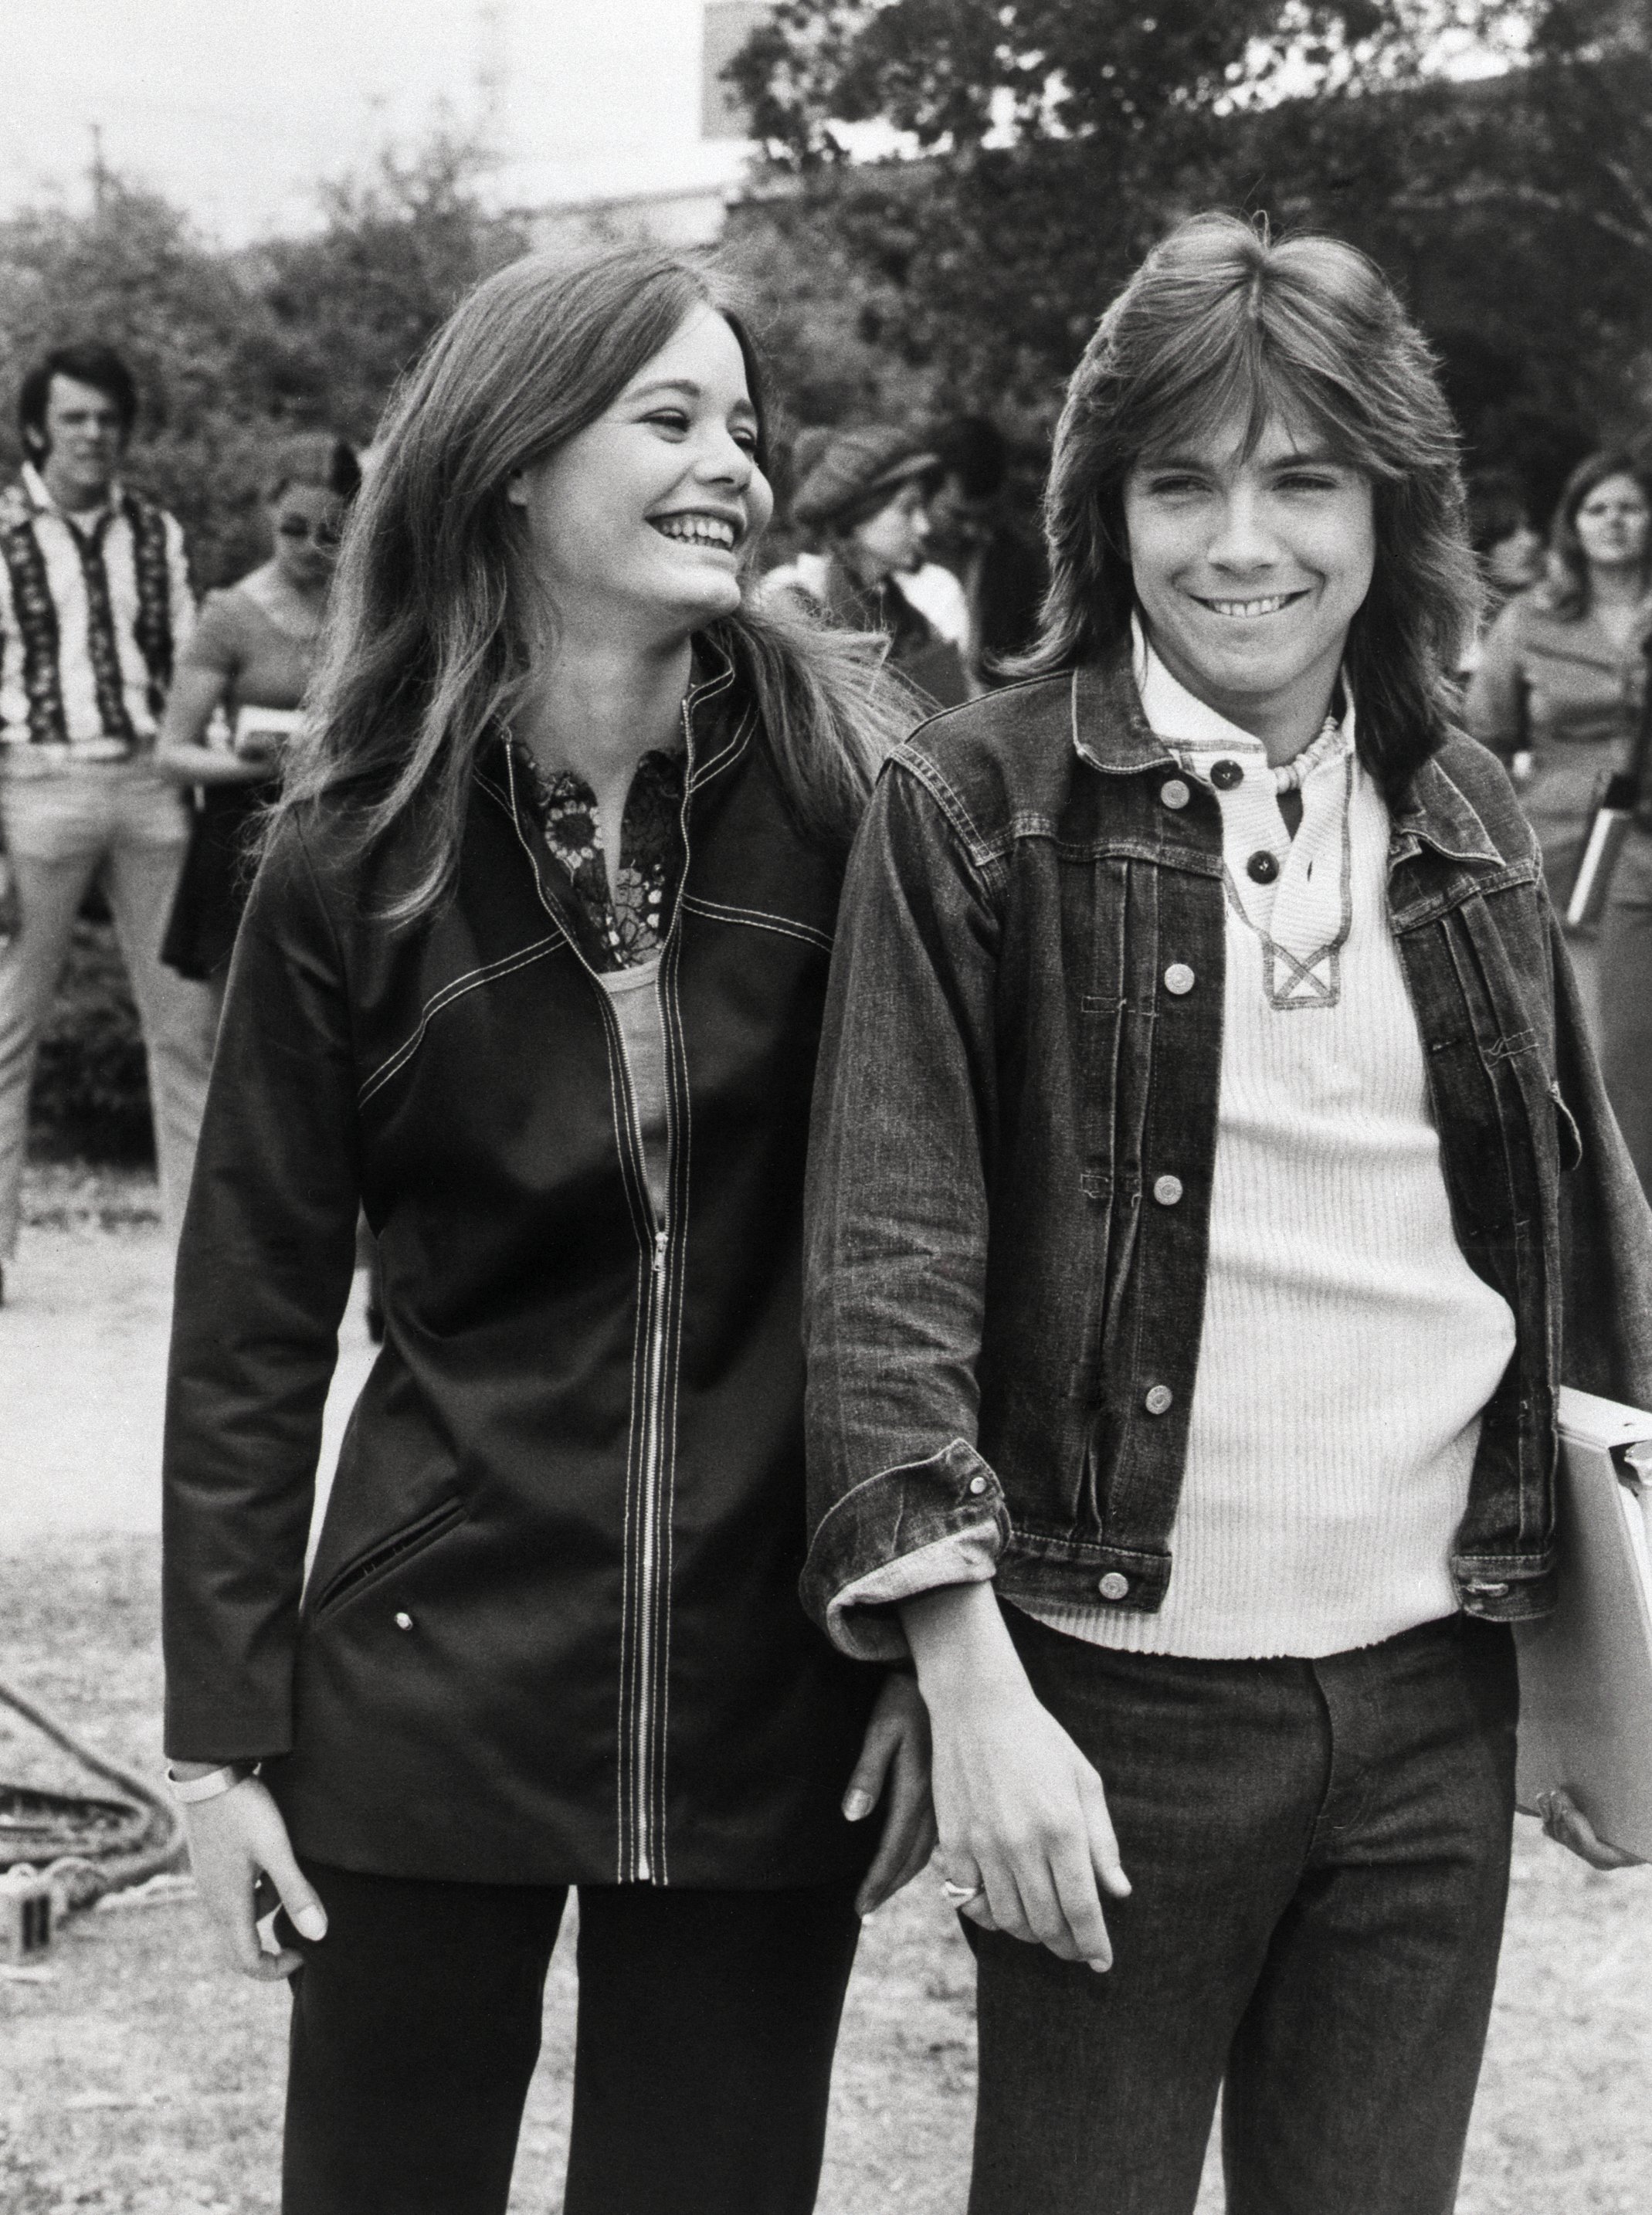 Susan Dey and David Cassidy, stars of "The Partridge Family", share a joke. | Source: Getty Images